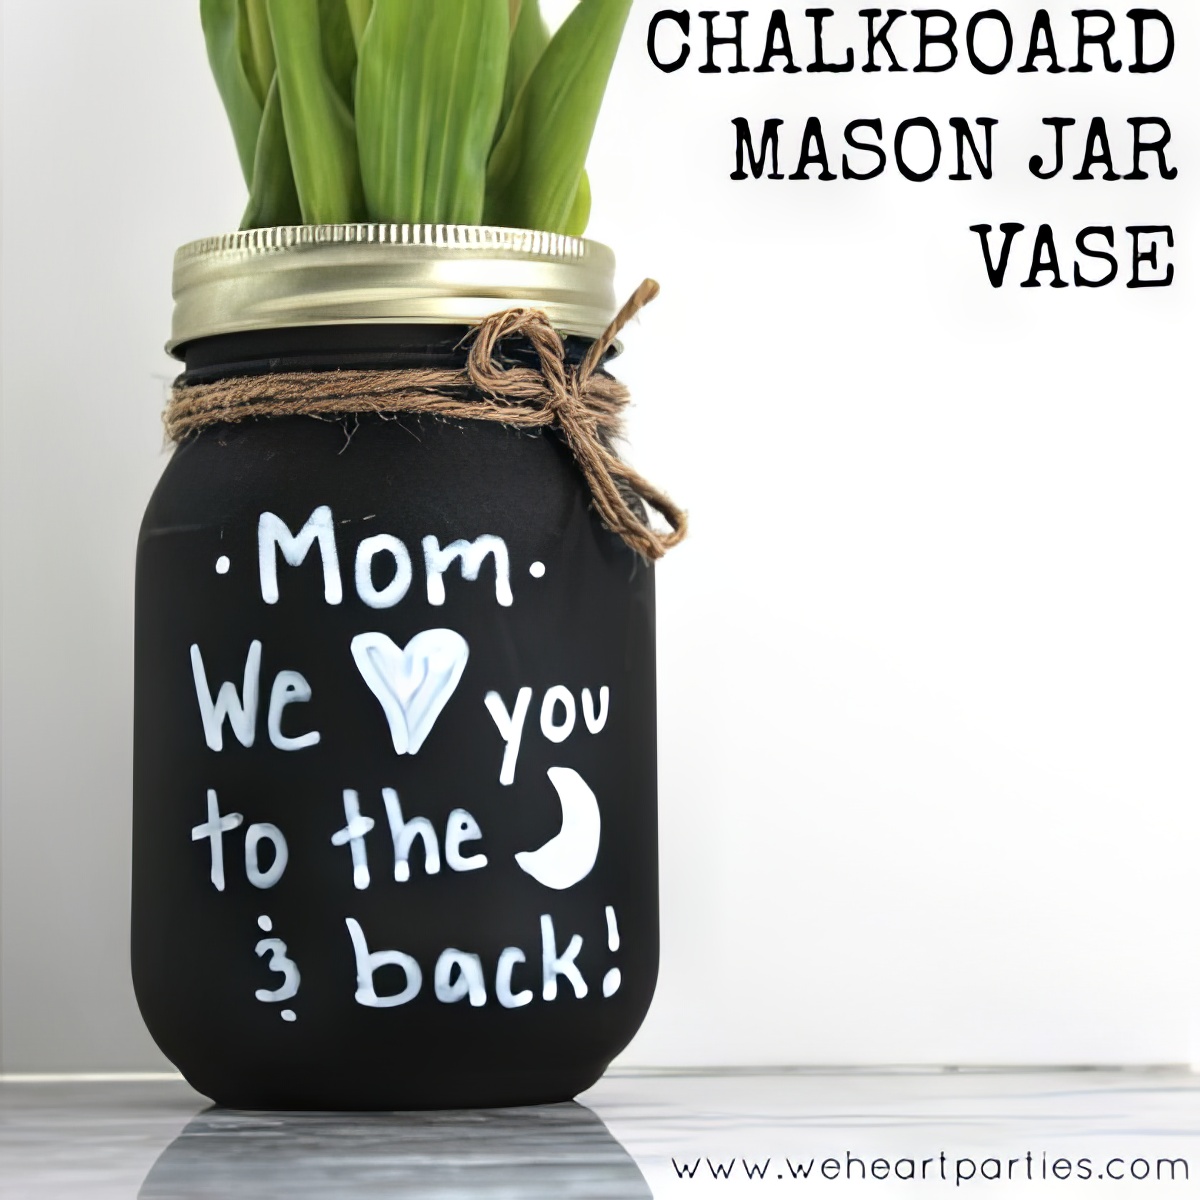 DIY Chalkboard Mason Jar Mothers Day Vase craft ideas for kids of all ages